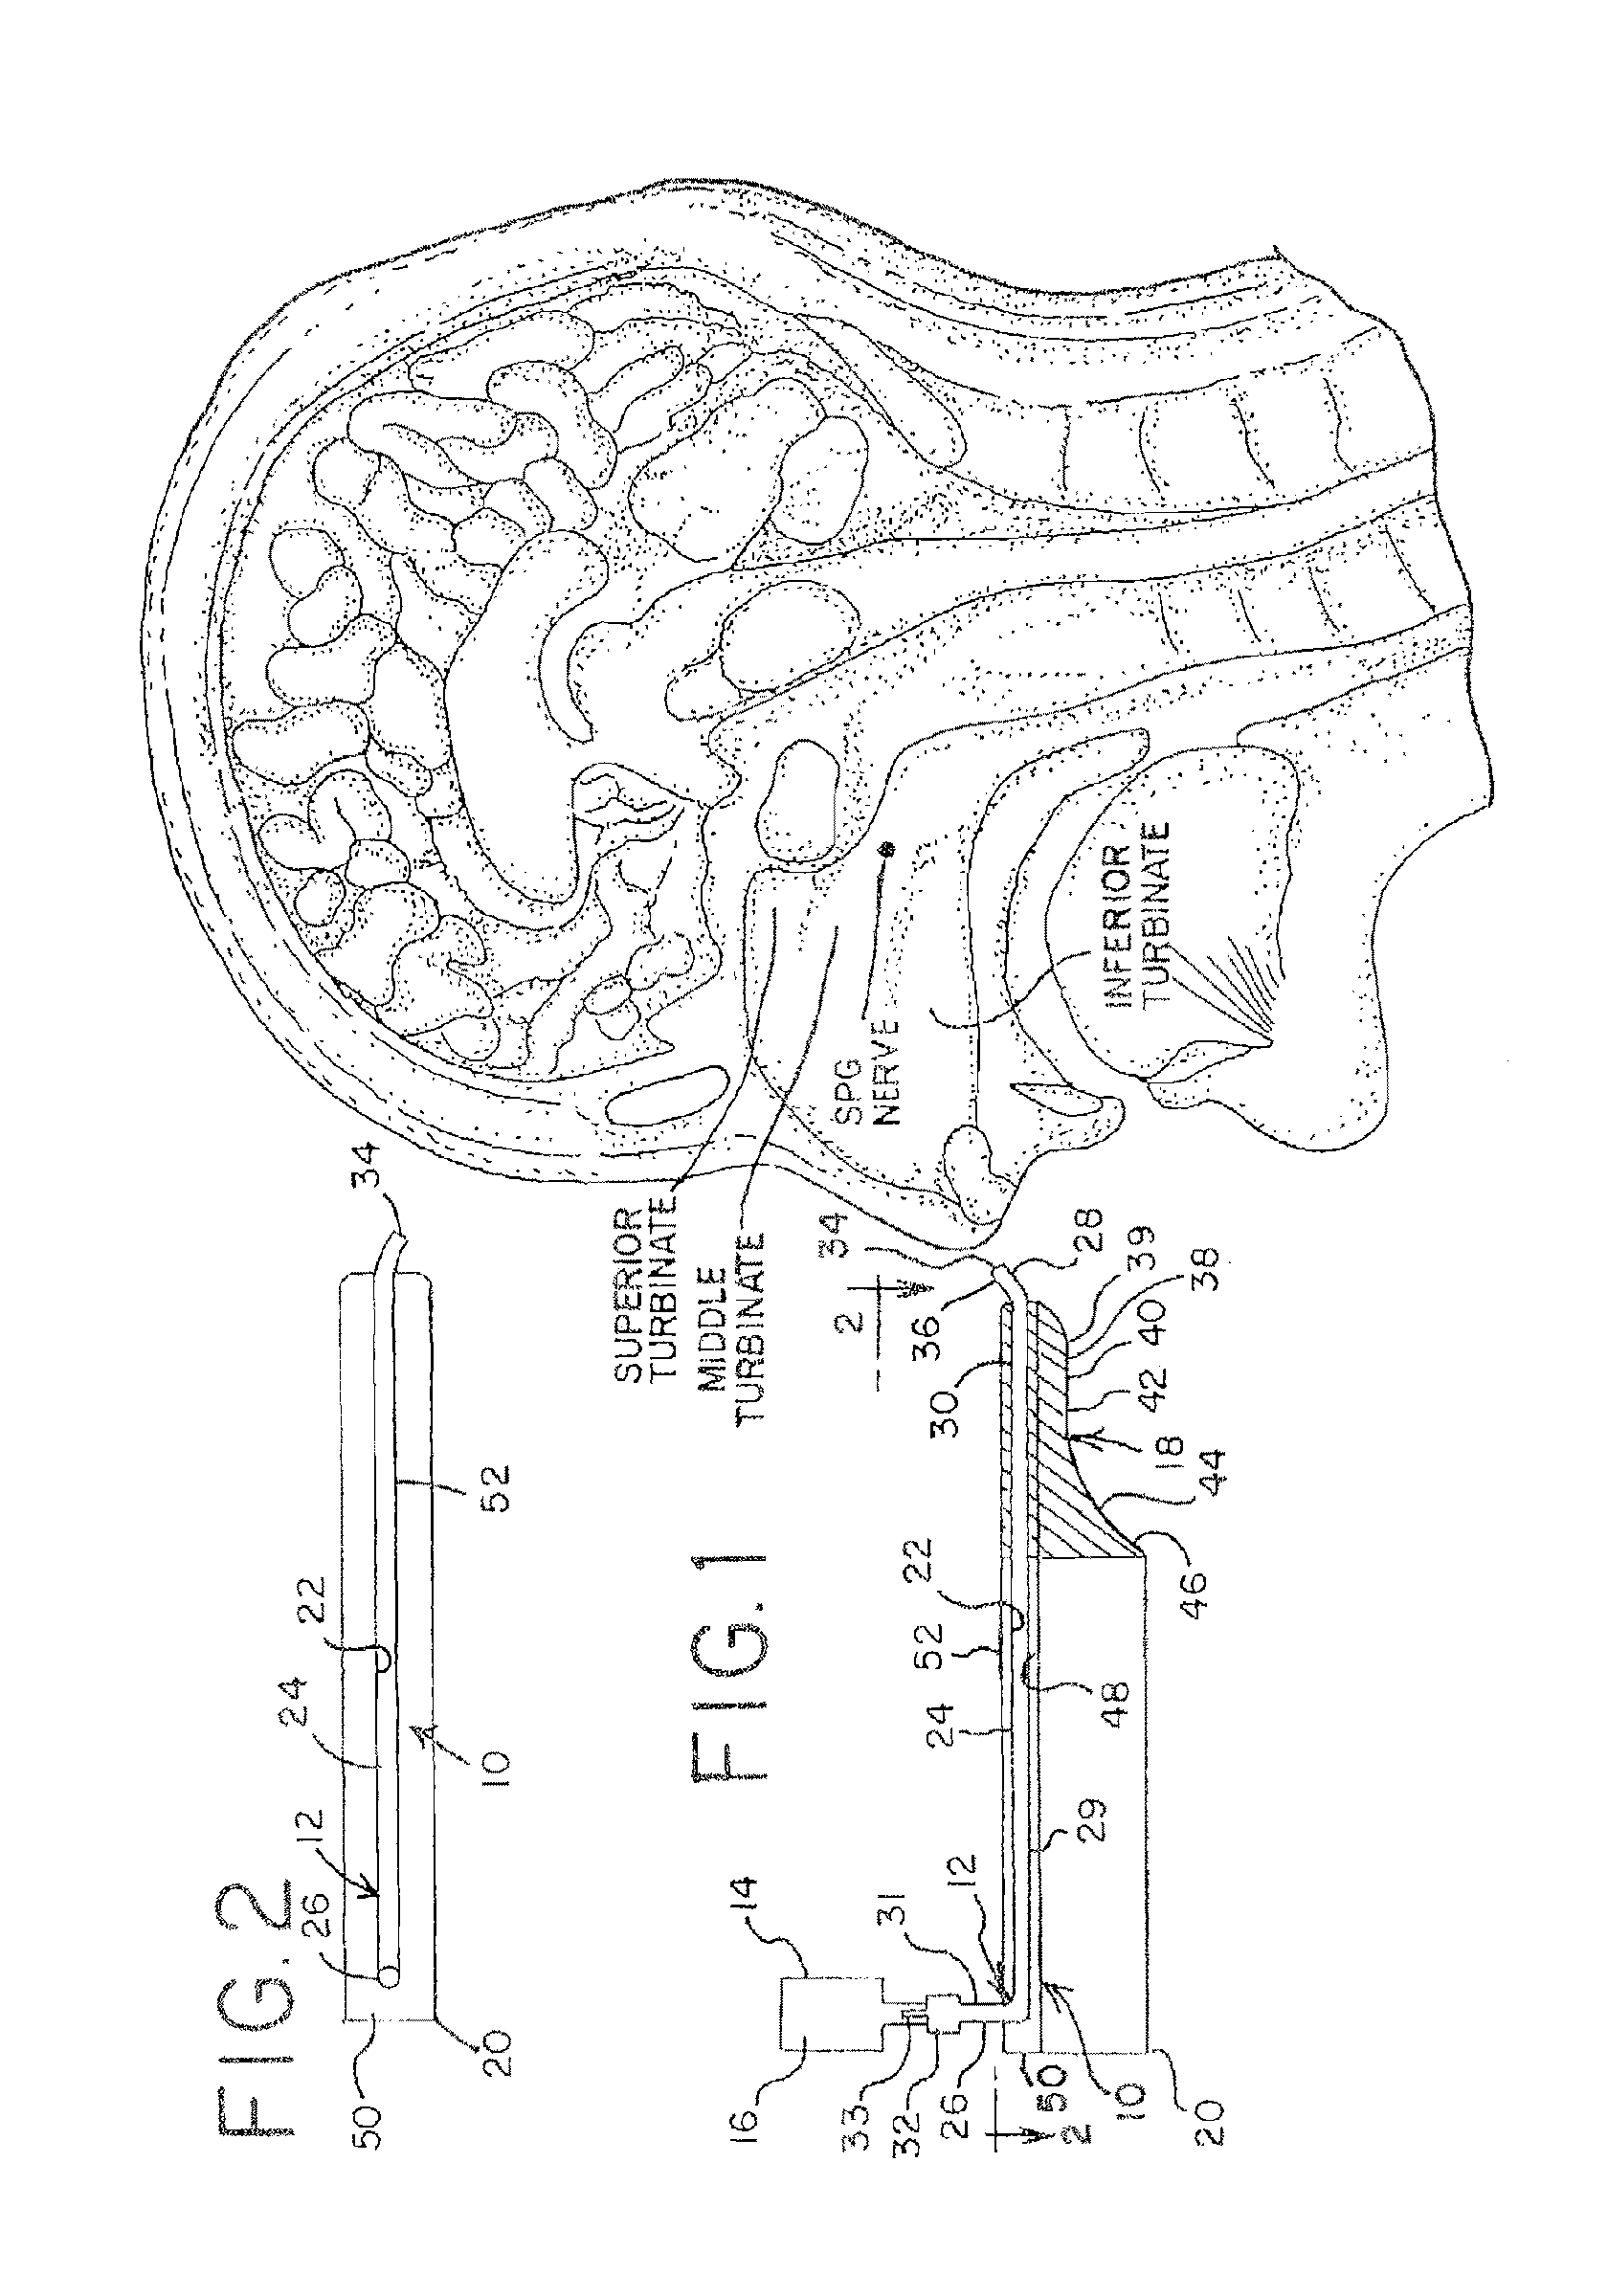 Devices for Delivering a Medicament and Connector for Same